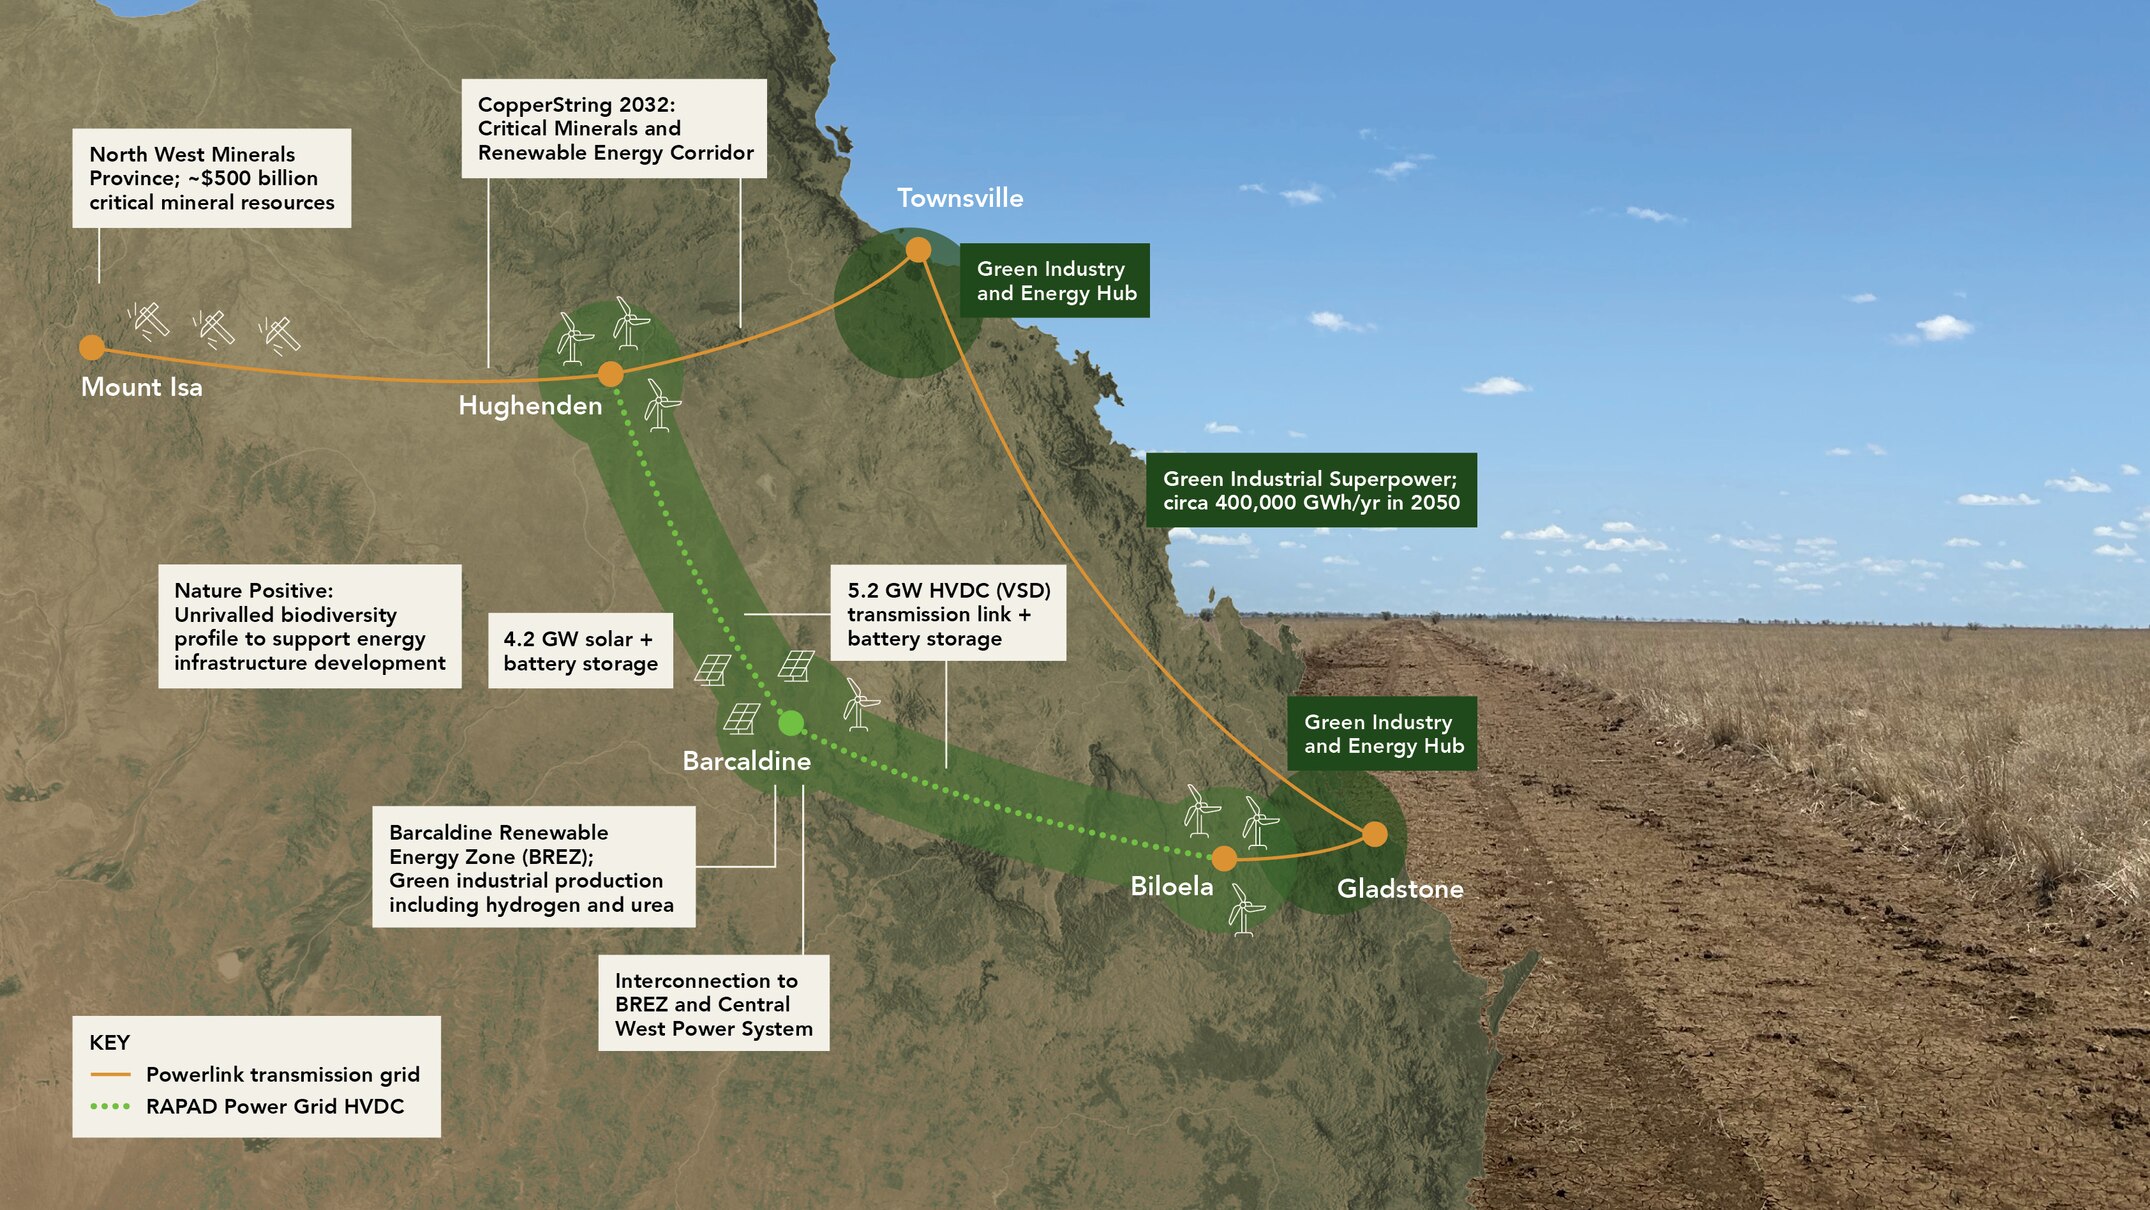 hughenden-biloela power line proposed to connect western queensland to the national electricity grid